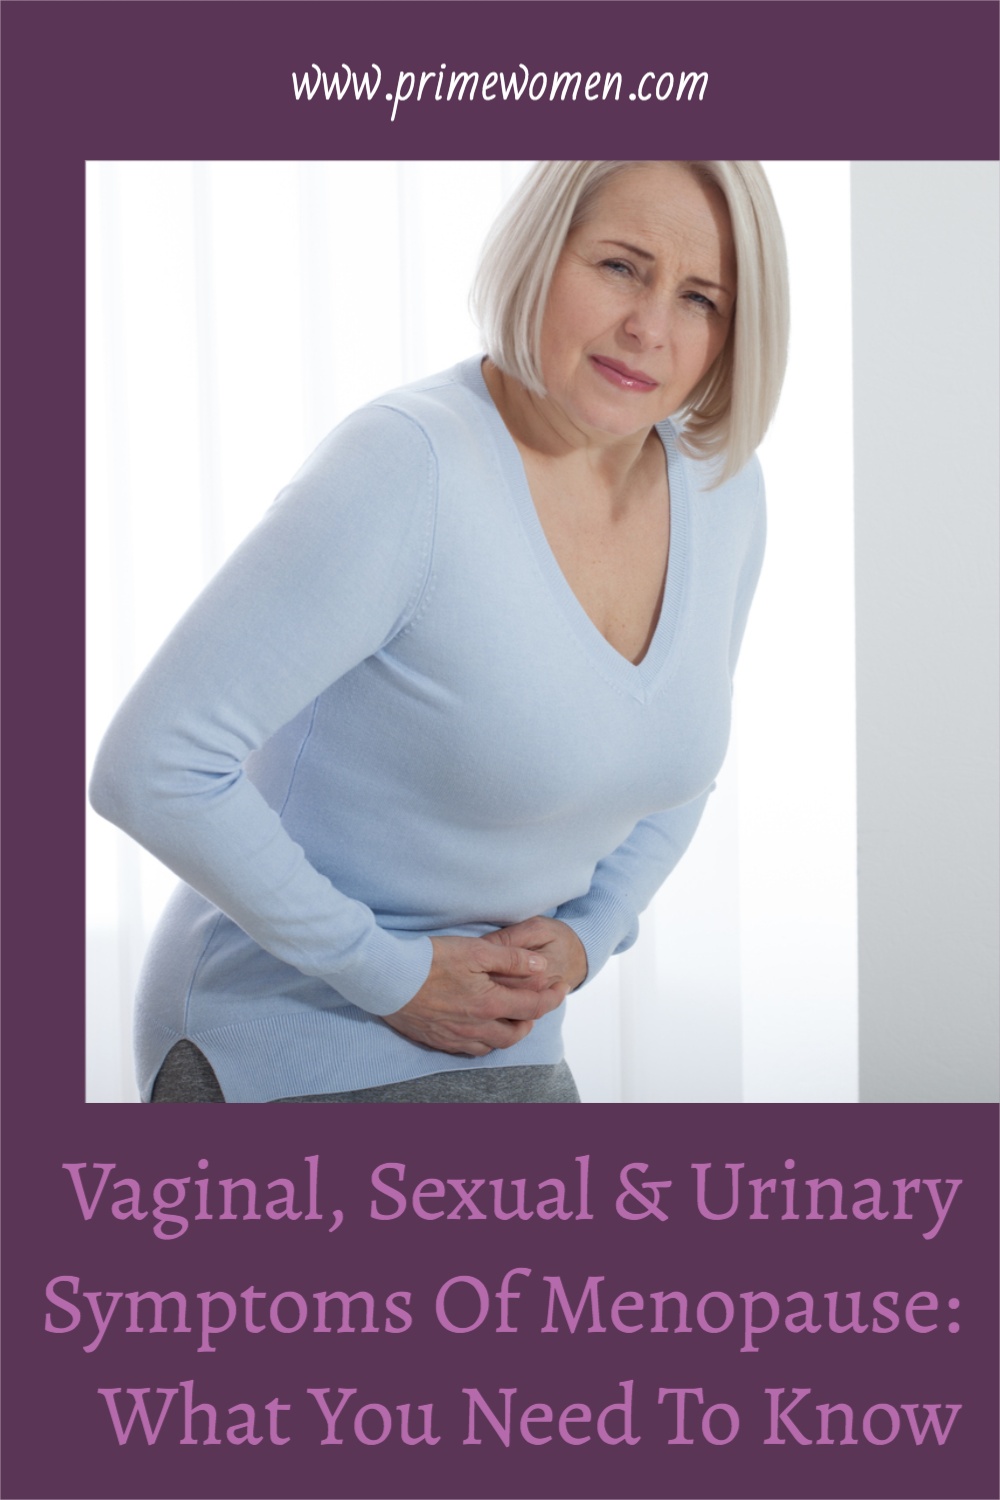 Vaginal, Sexual & Urinary Symptoms Of Menopause: What You Need To Know